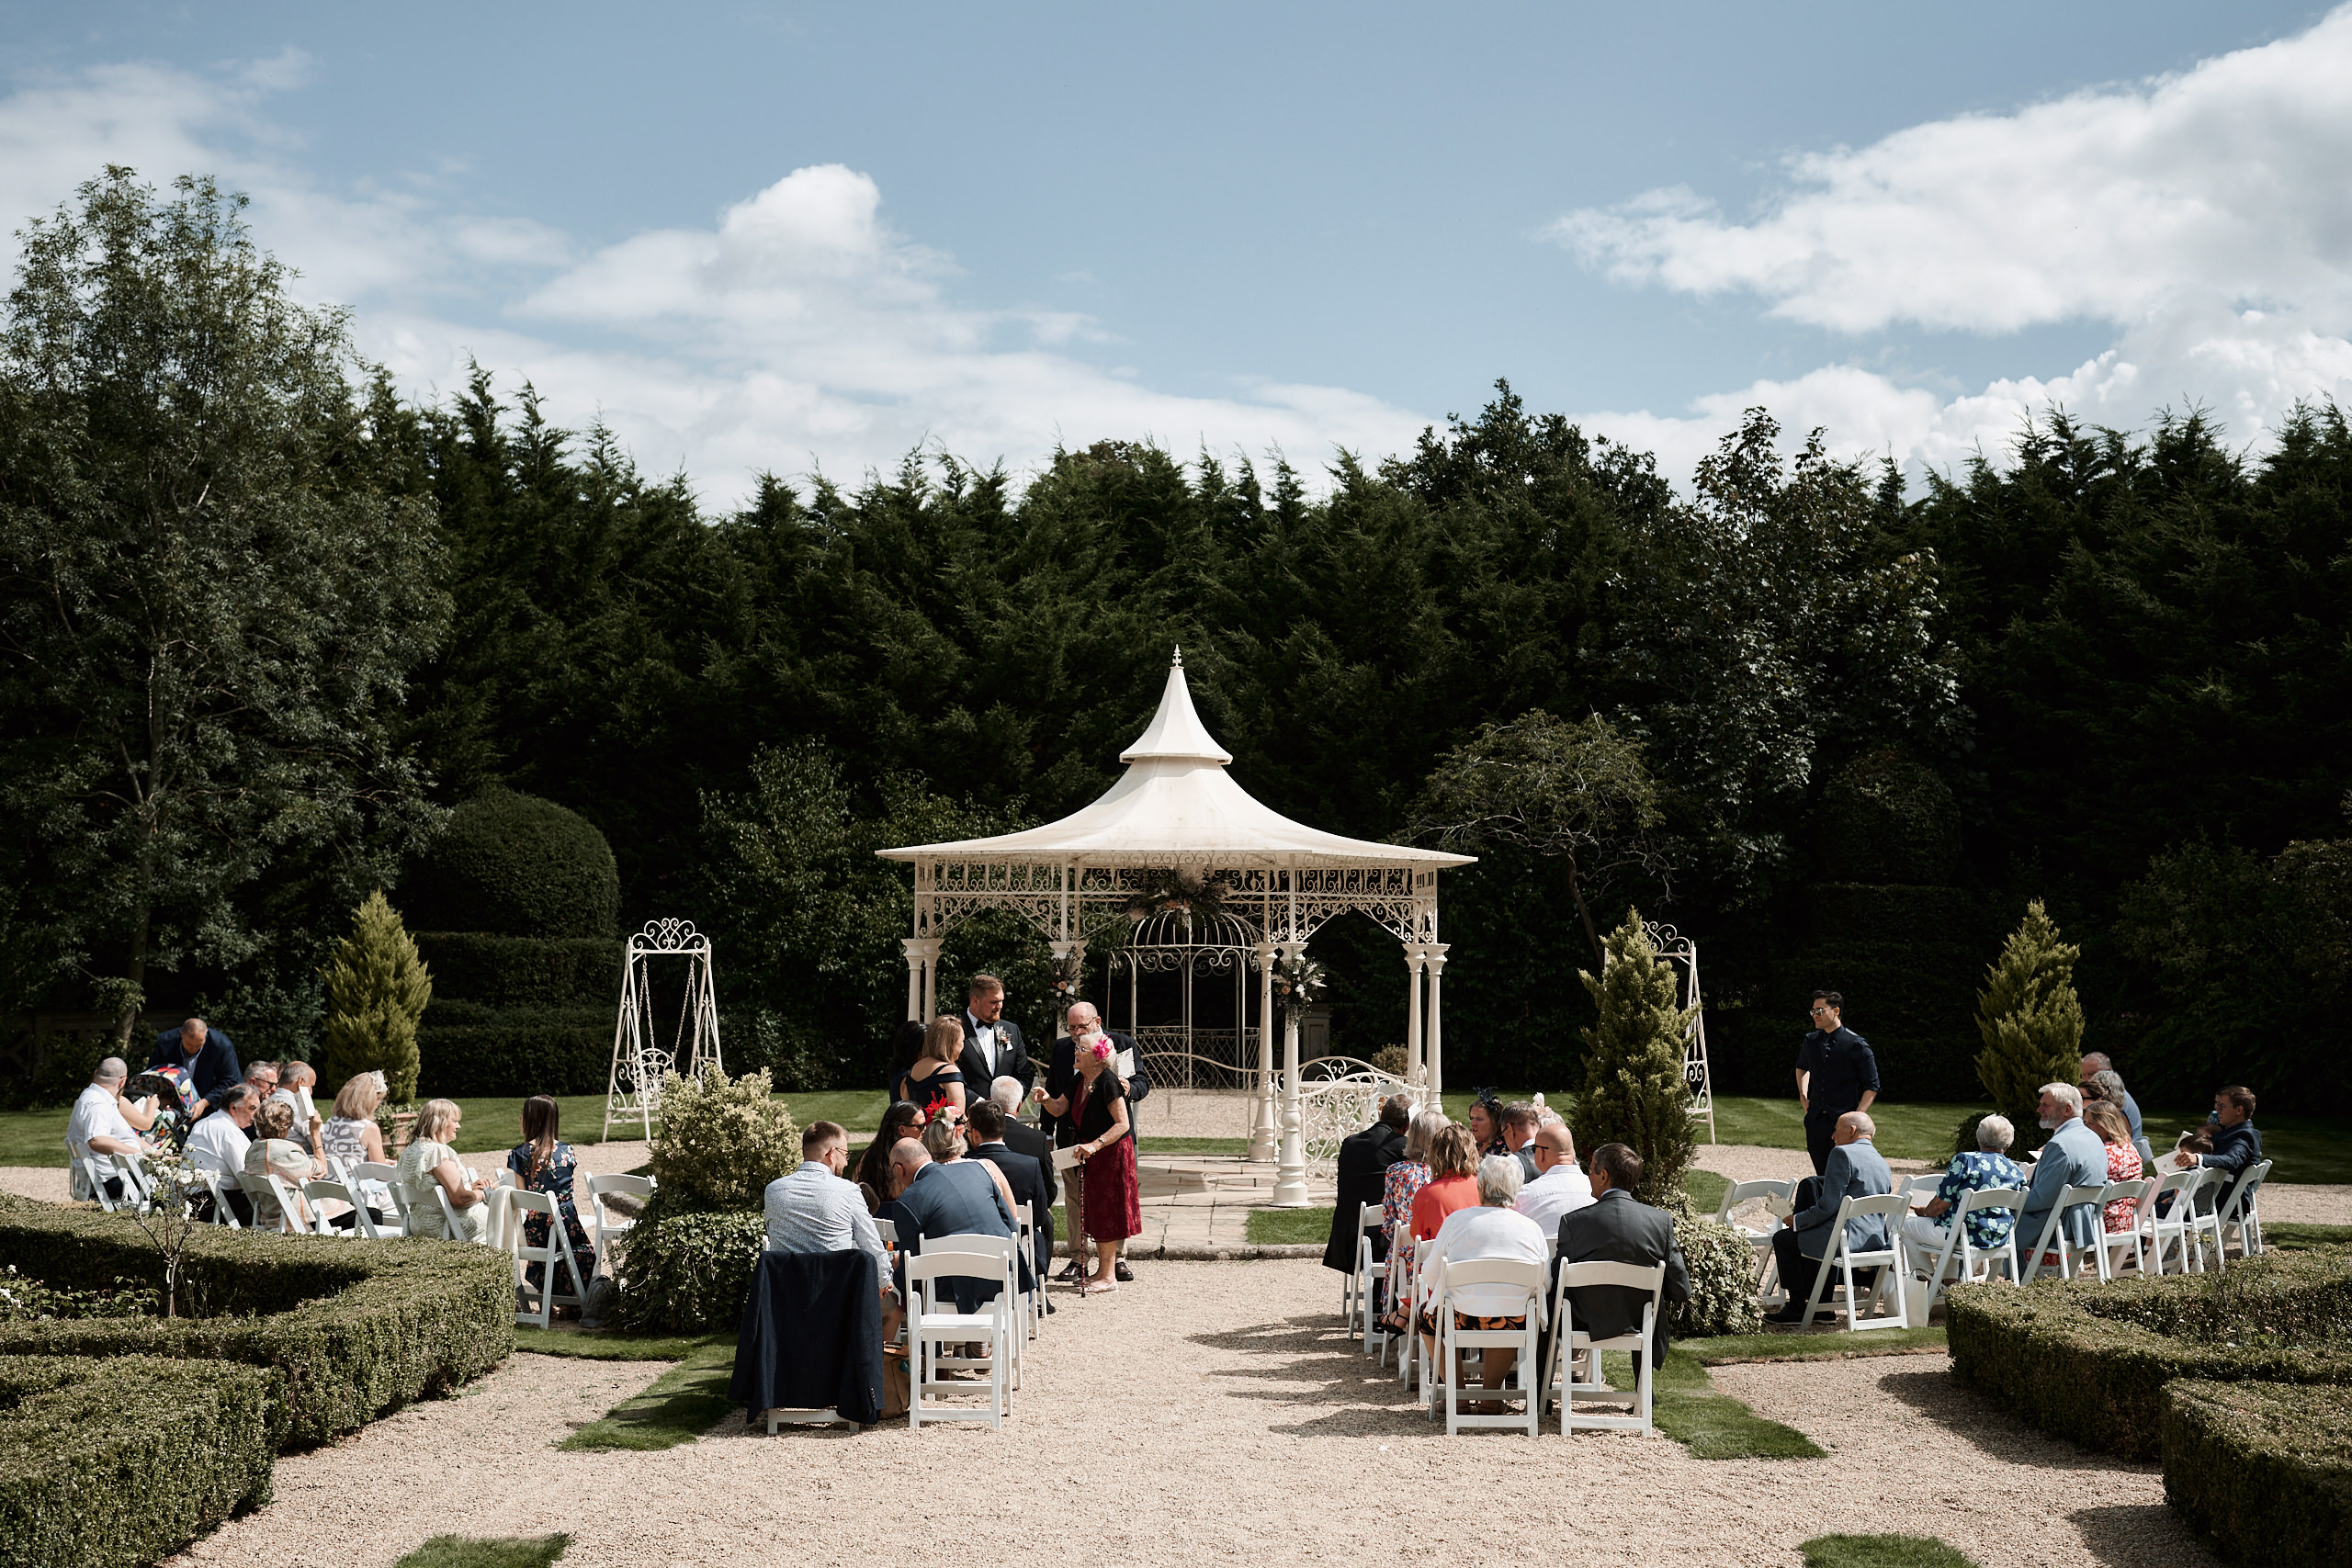 A wedding taking place in a garden that has a small roofed structure.